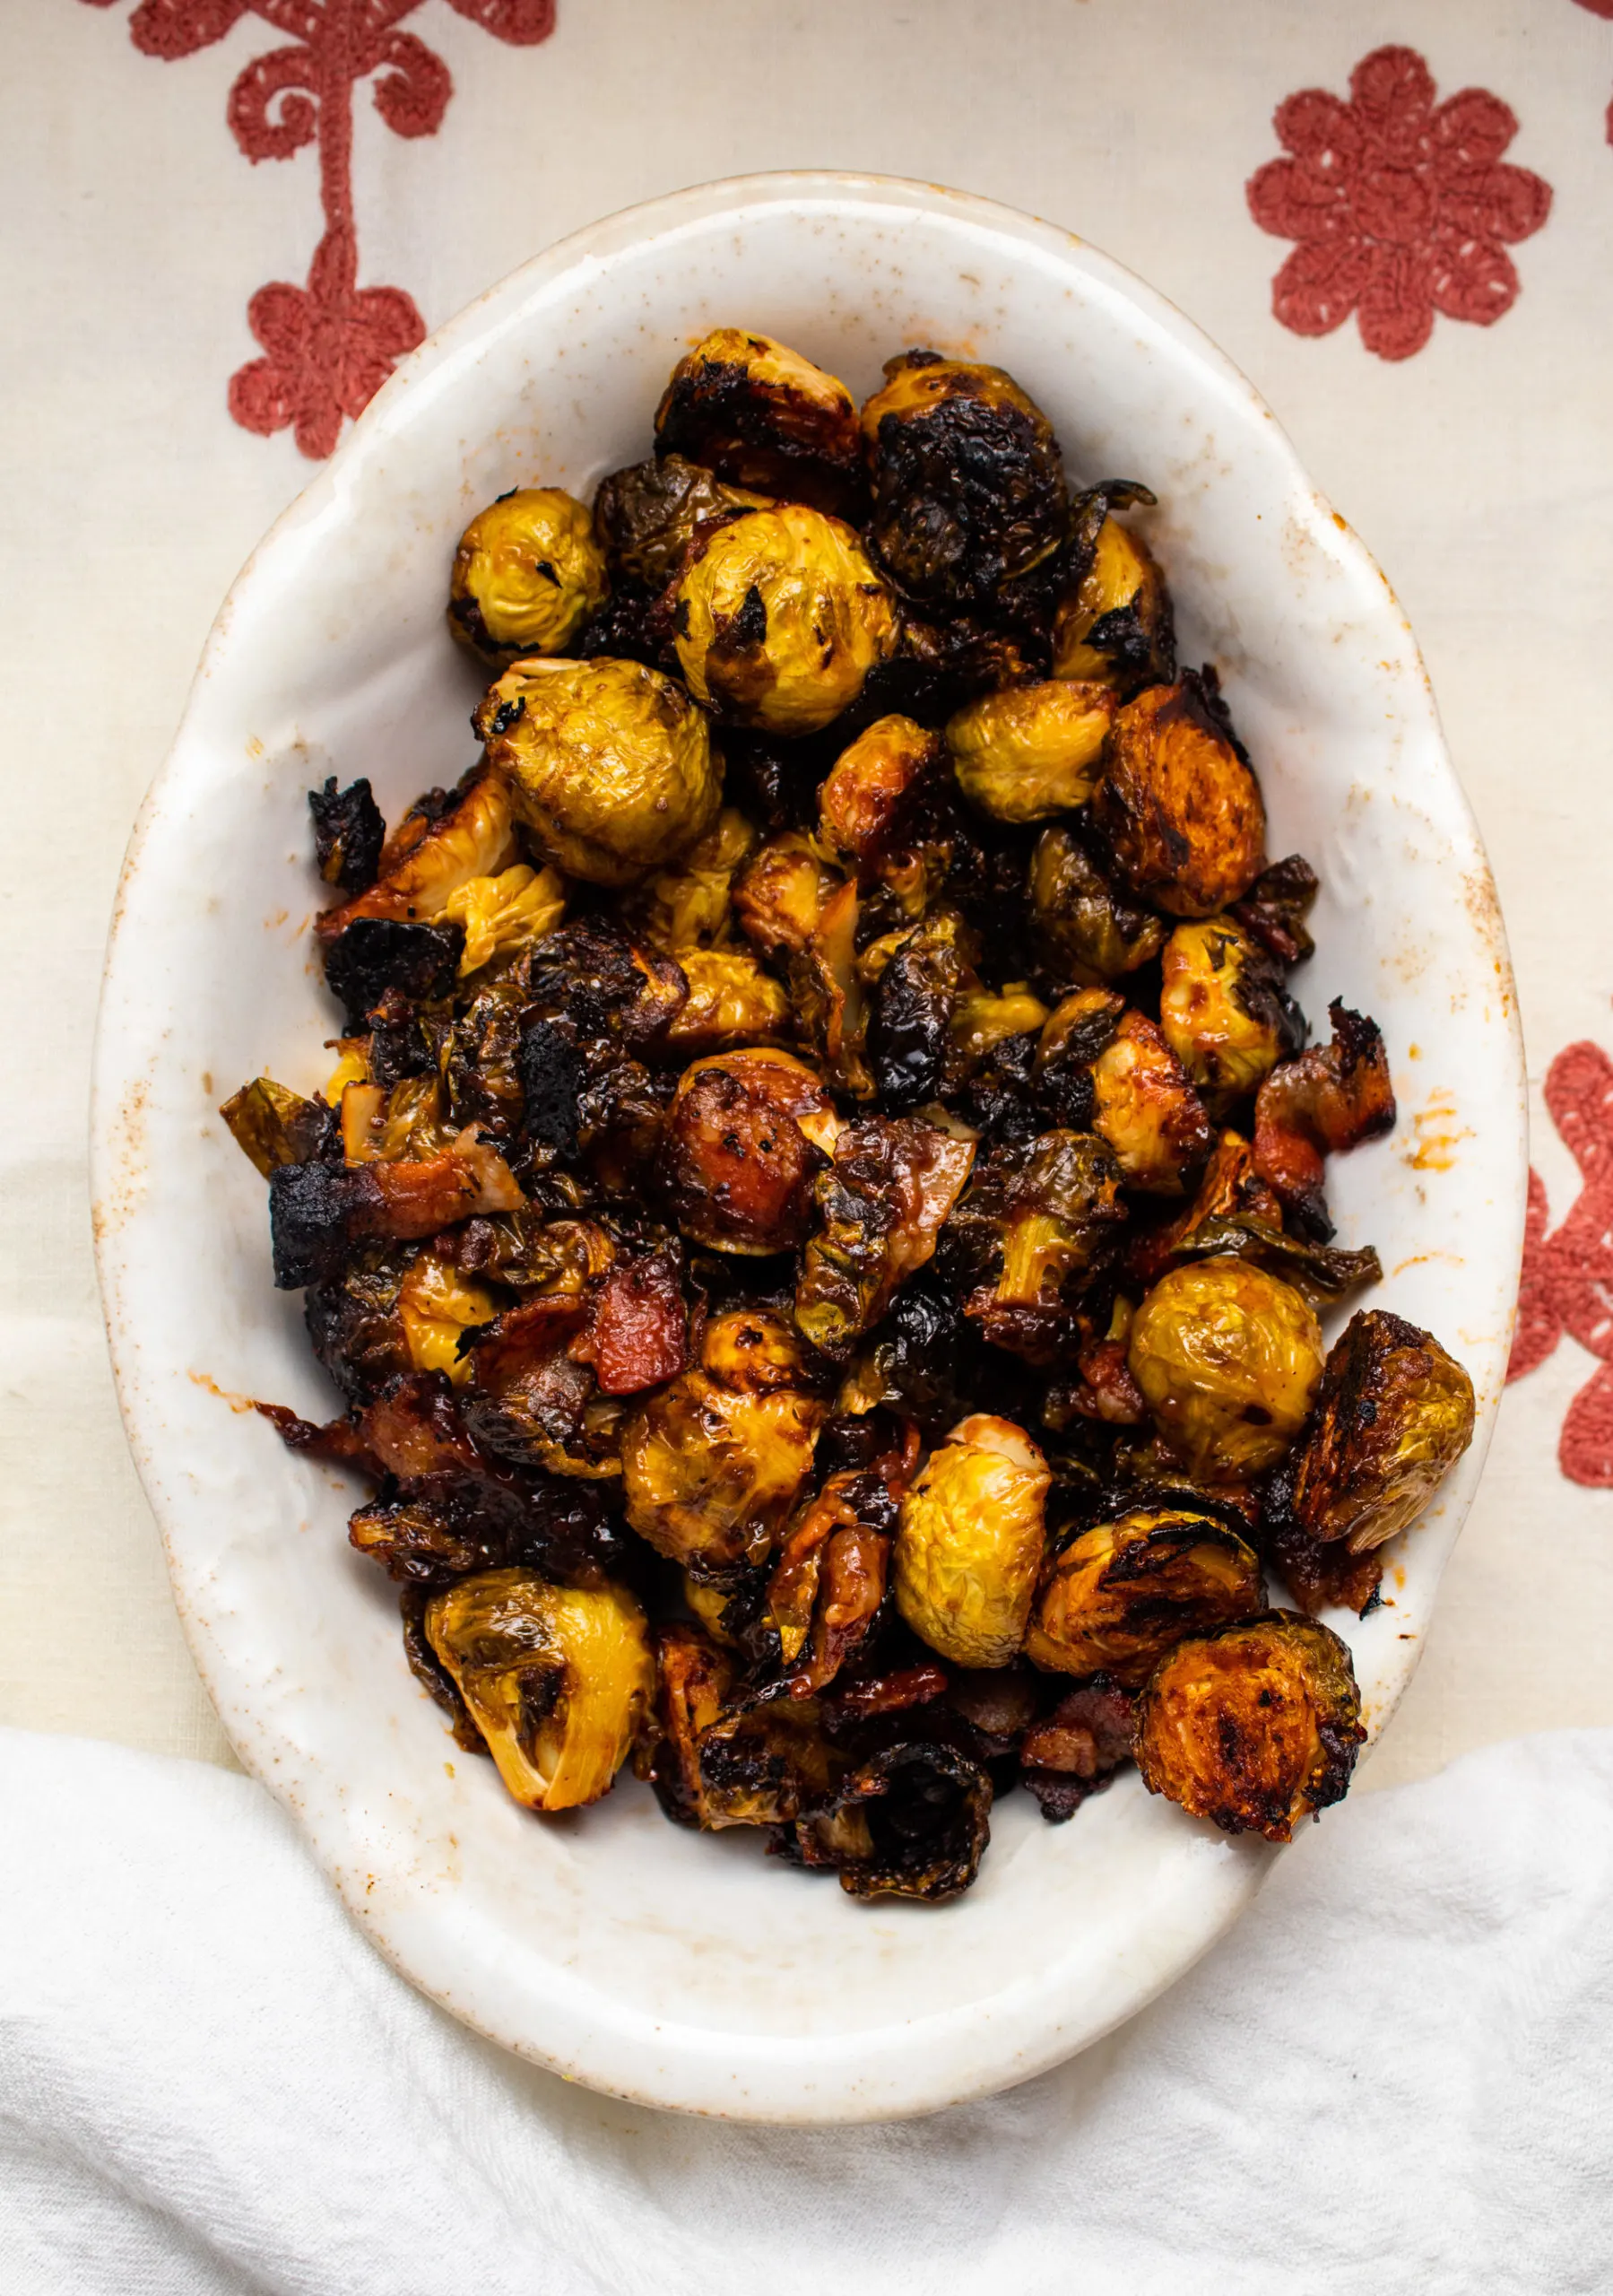 Brussel sprouts are roasted in the oven with bacon and a bbq glaze until crisp and caramelized. Learn how to make the best crispy bacon brussel sprouts.